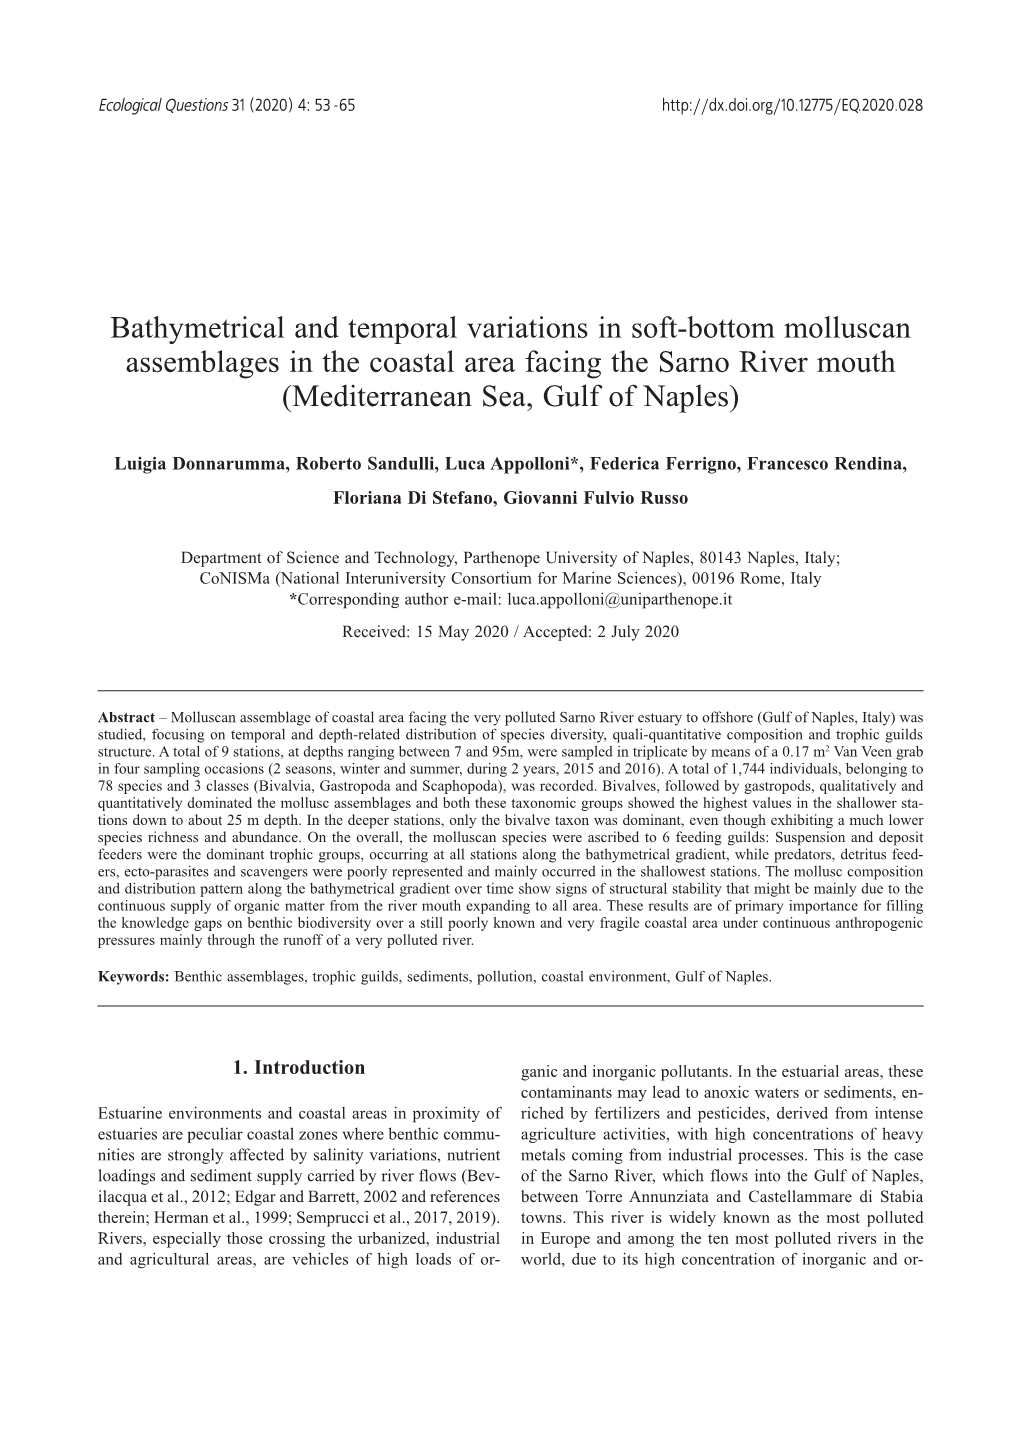 Bathymetrical and Temporal Variations in Soft-Bottom Molluscan Assemblages in the Coastal Area Facing the Sarno River Mouth (Mediterranean Sea, Gulf of Naples)